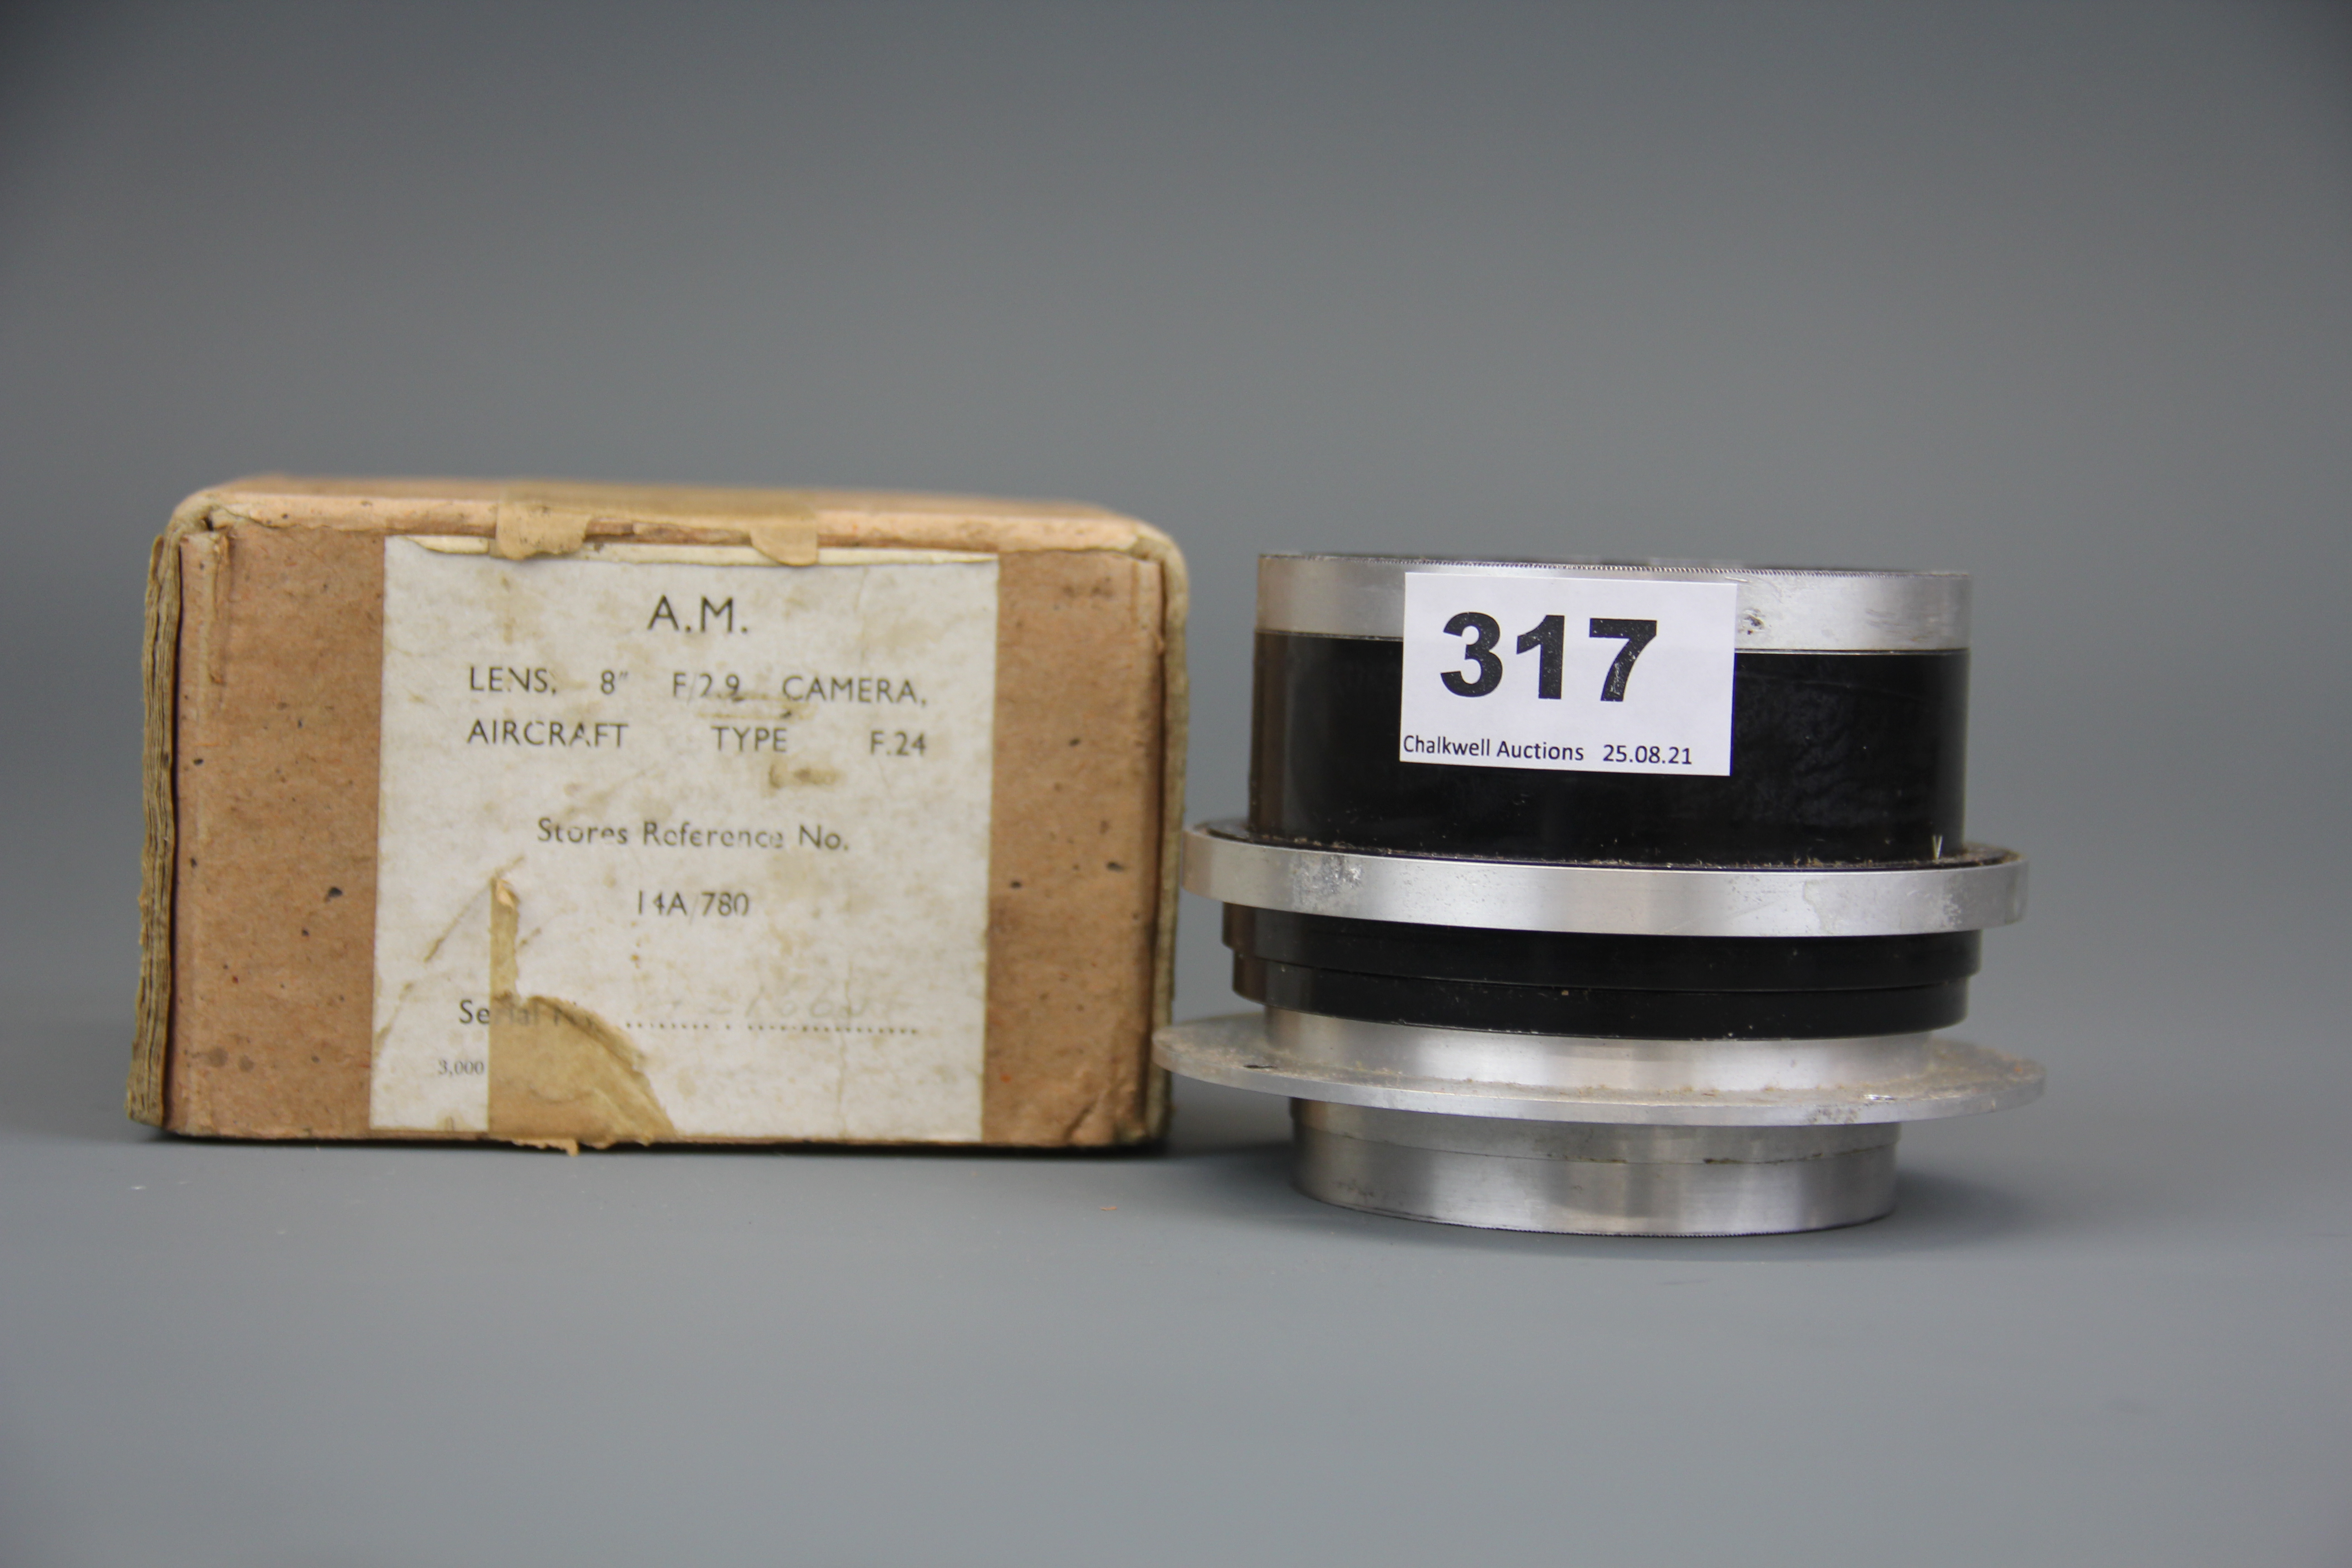 An Air Ministry Dallmayer 8 in F/2.9 camera lens aircraft type f24,14a 780 with original box.